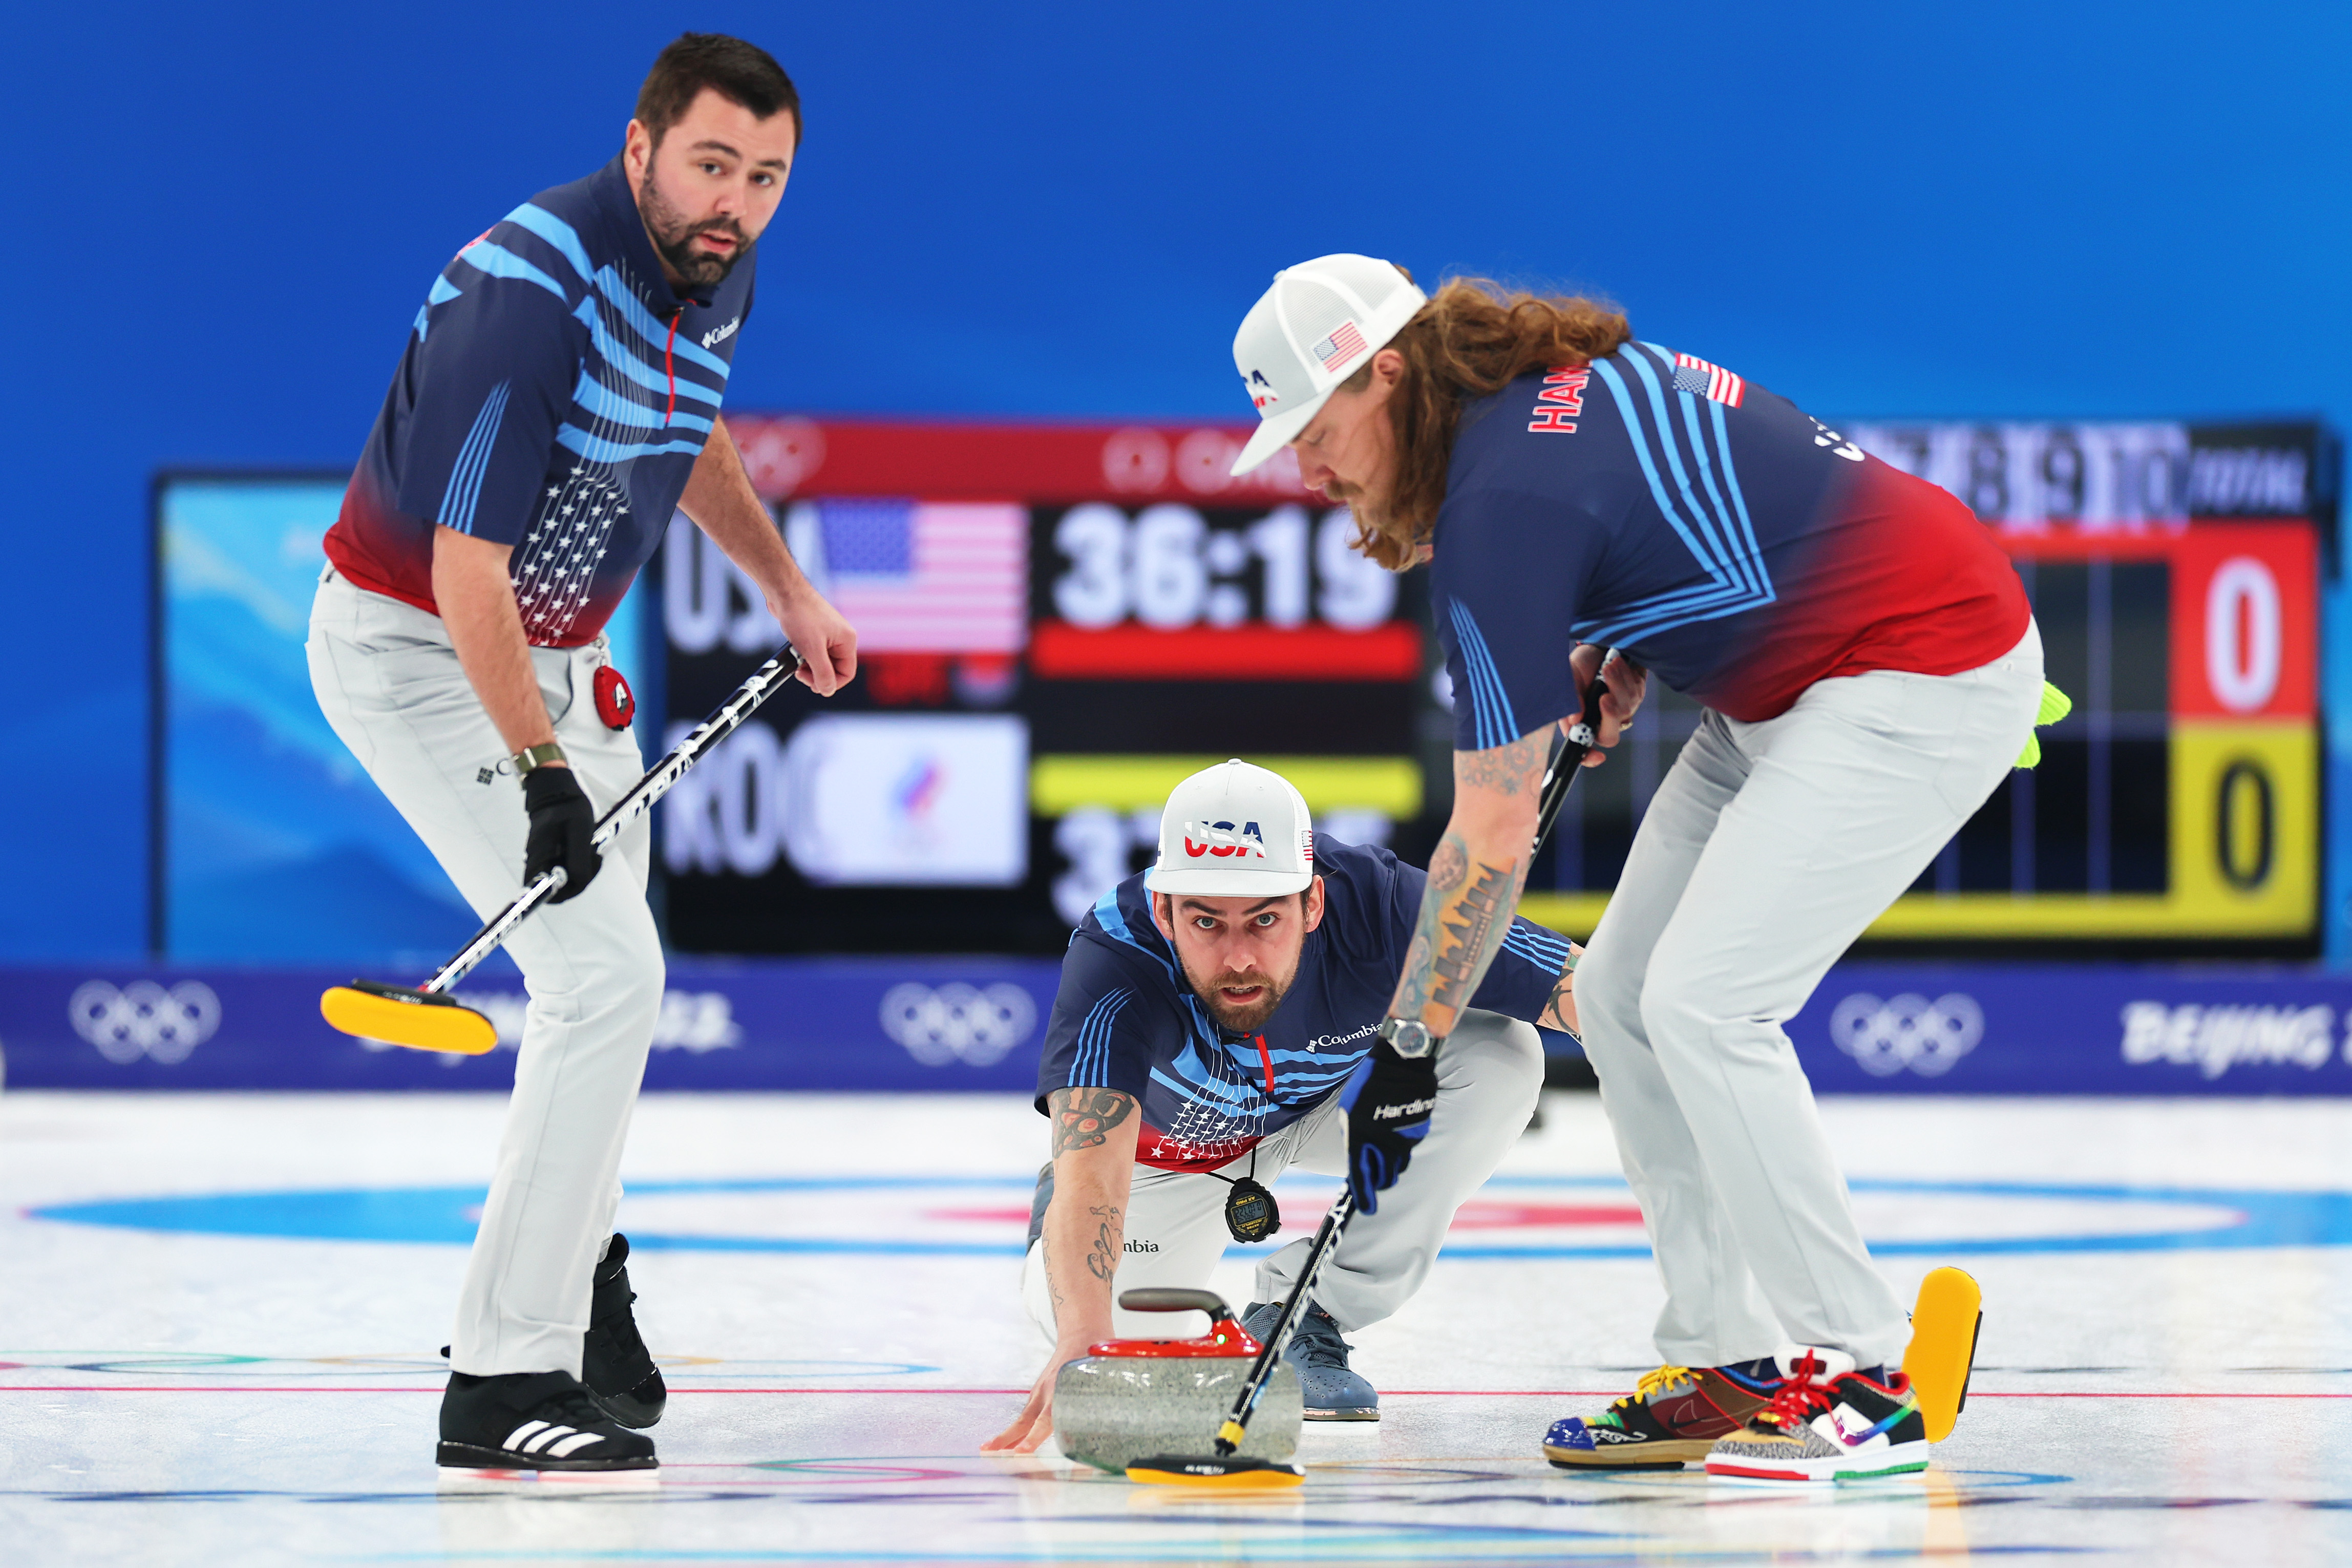 Curling Rules Everything You Need to Know